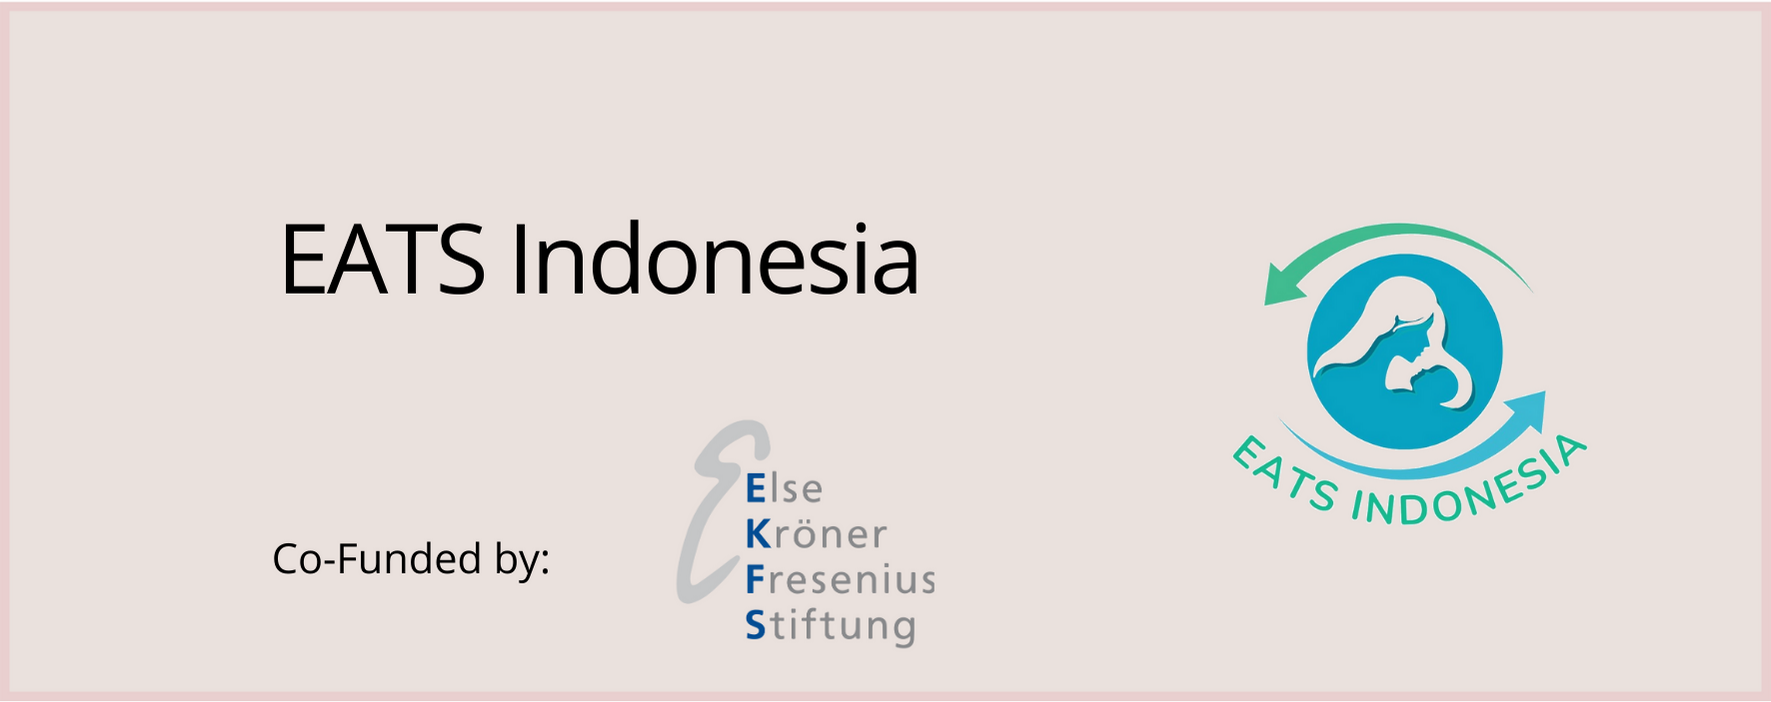 EATS Indonesia Project
